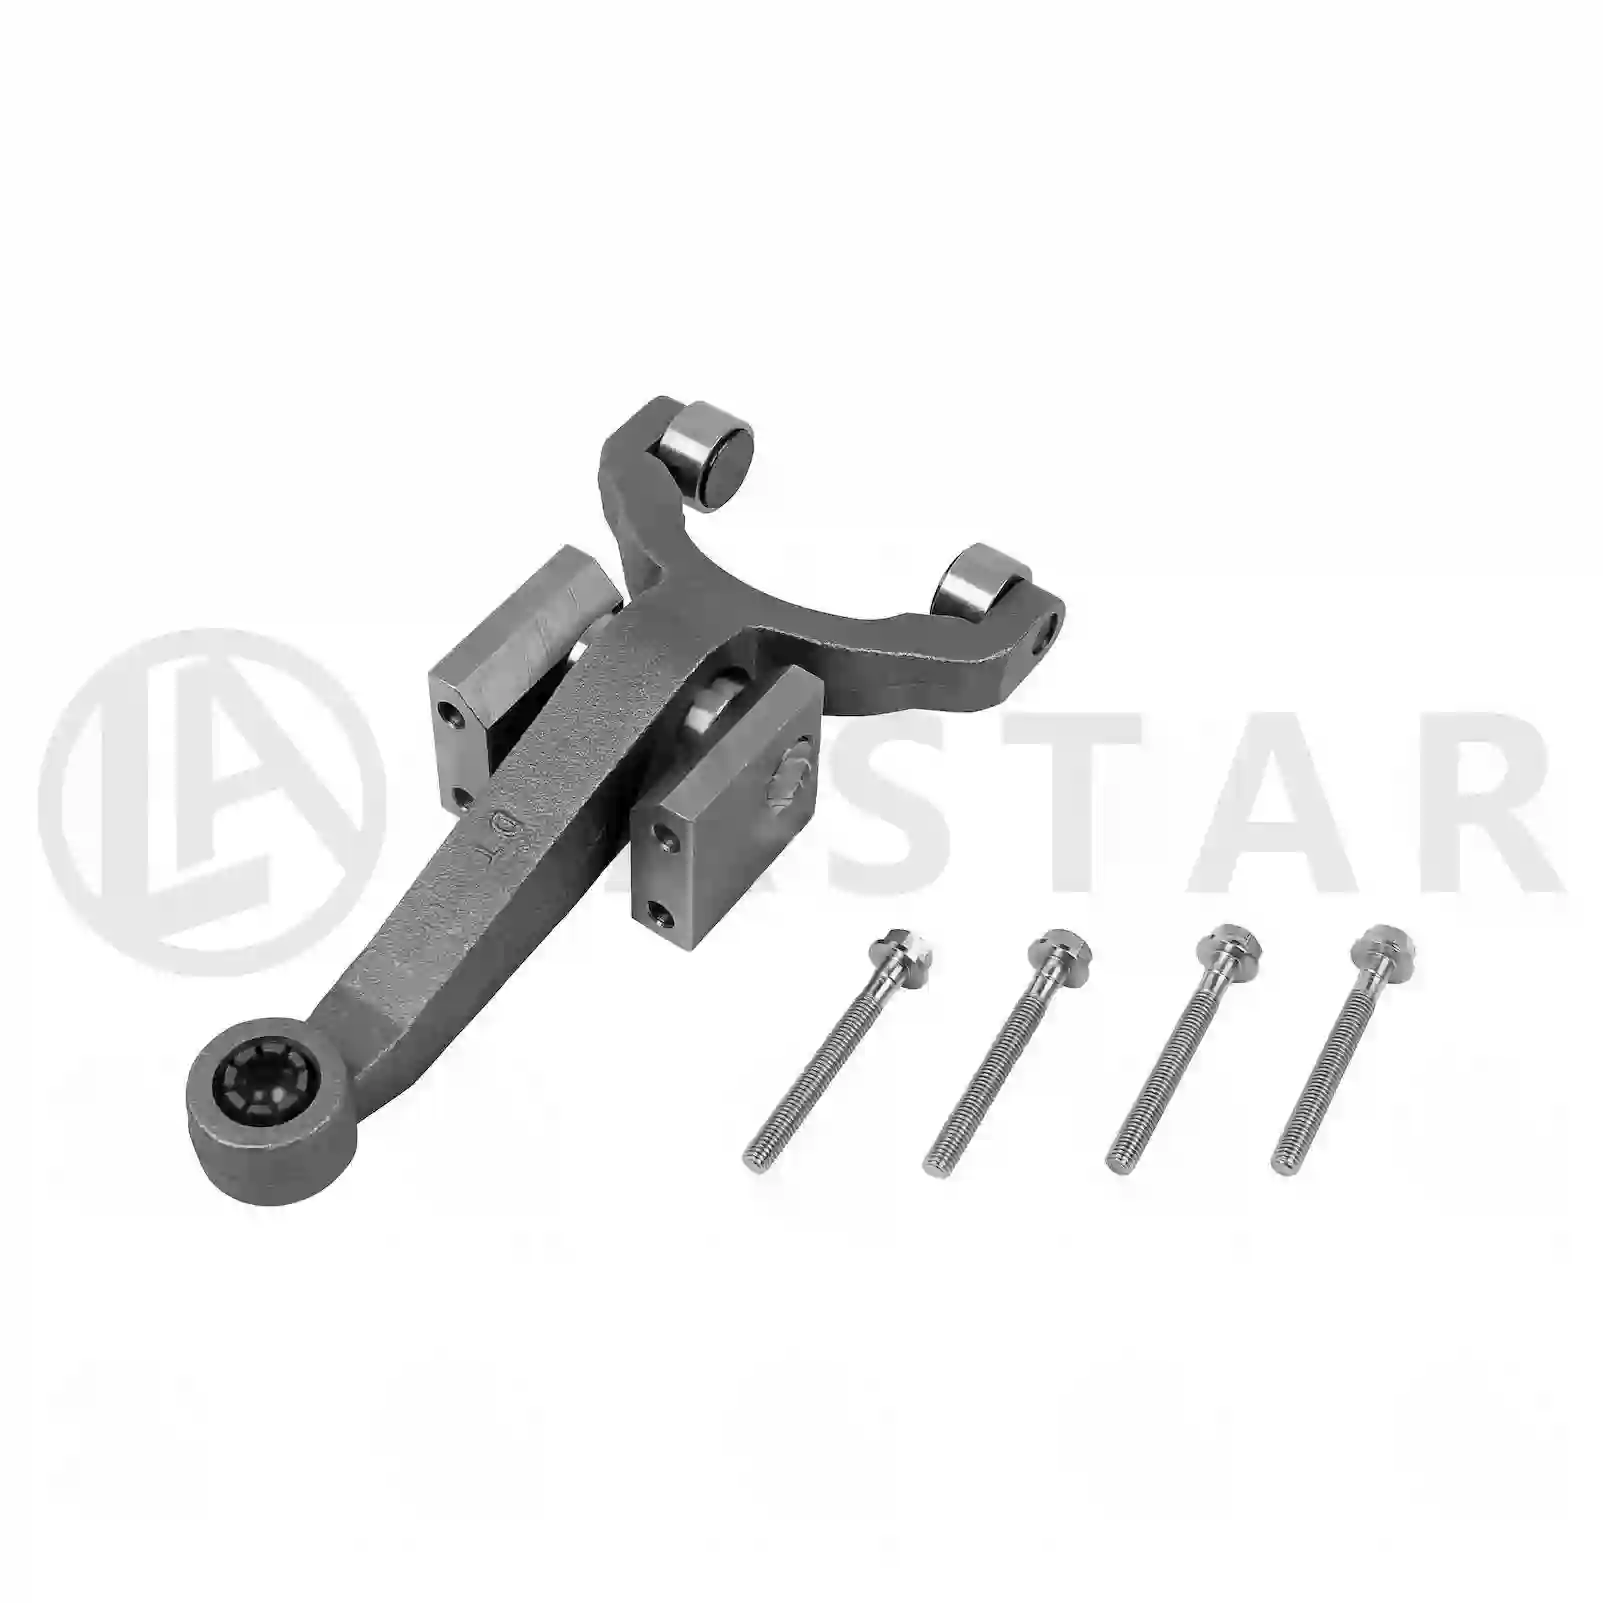 Release lever, 77722690, 1316304, 1391637, 1392537, ZG30366-0008 ||  77722690 Lastar Spare Part | Truck Spare Parts, Auotomotive Spare Parts Release lever, 77722690, 1316304, 1391637, 1392537, ZG30366-0008 ||  77722690 Lastar Spare Part | Truck Spare Parts, Auotomotive Spare Parts